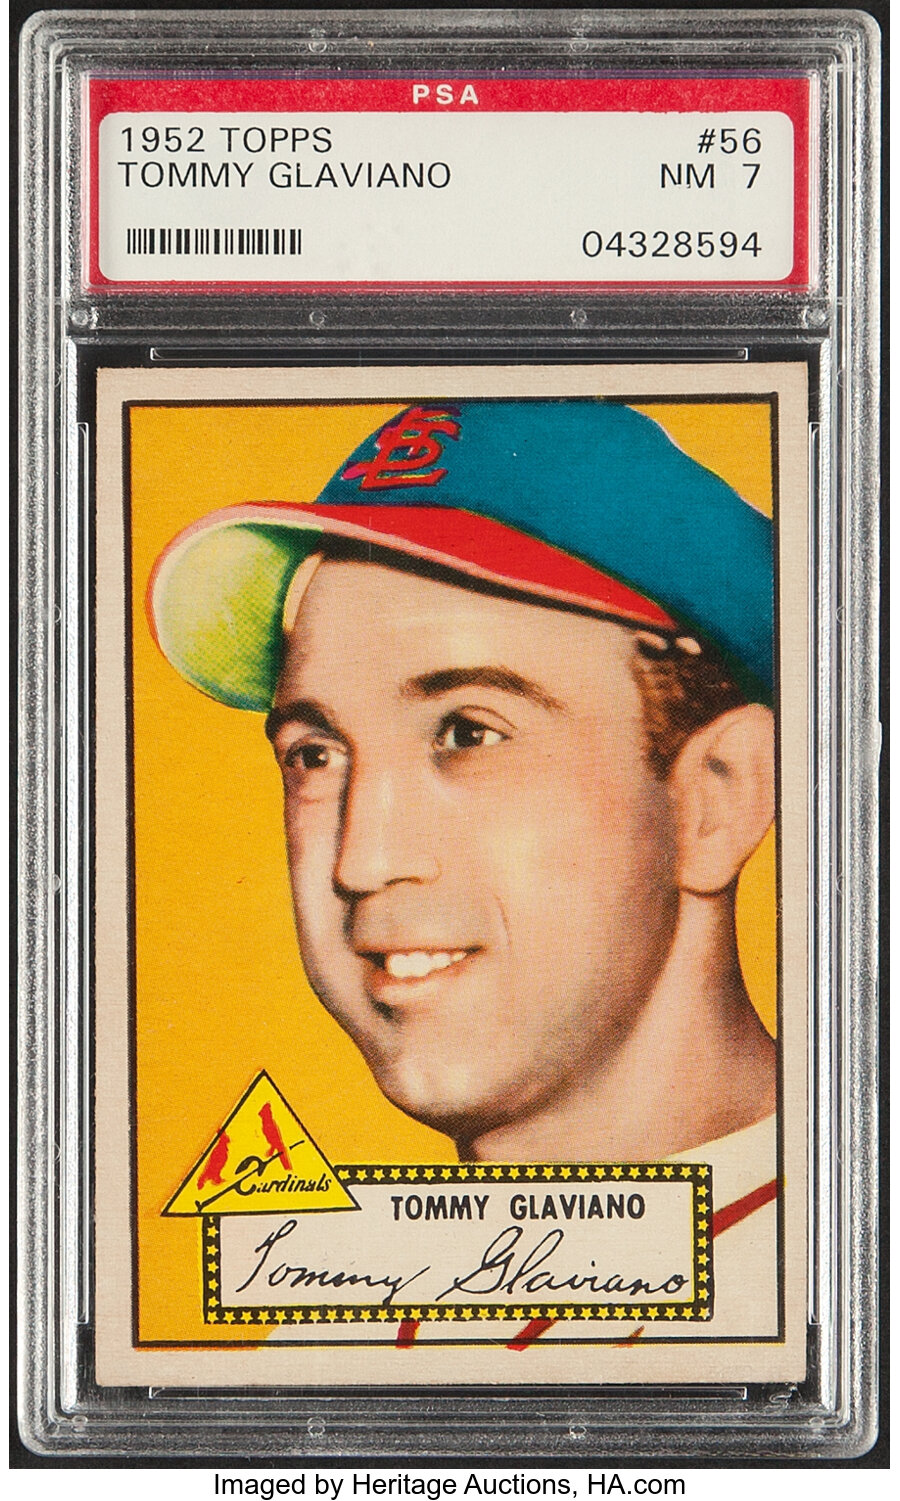 1952 Topps Tommy Glaviano #56 PSA NM 7